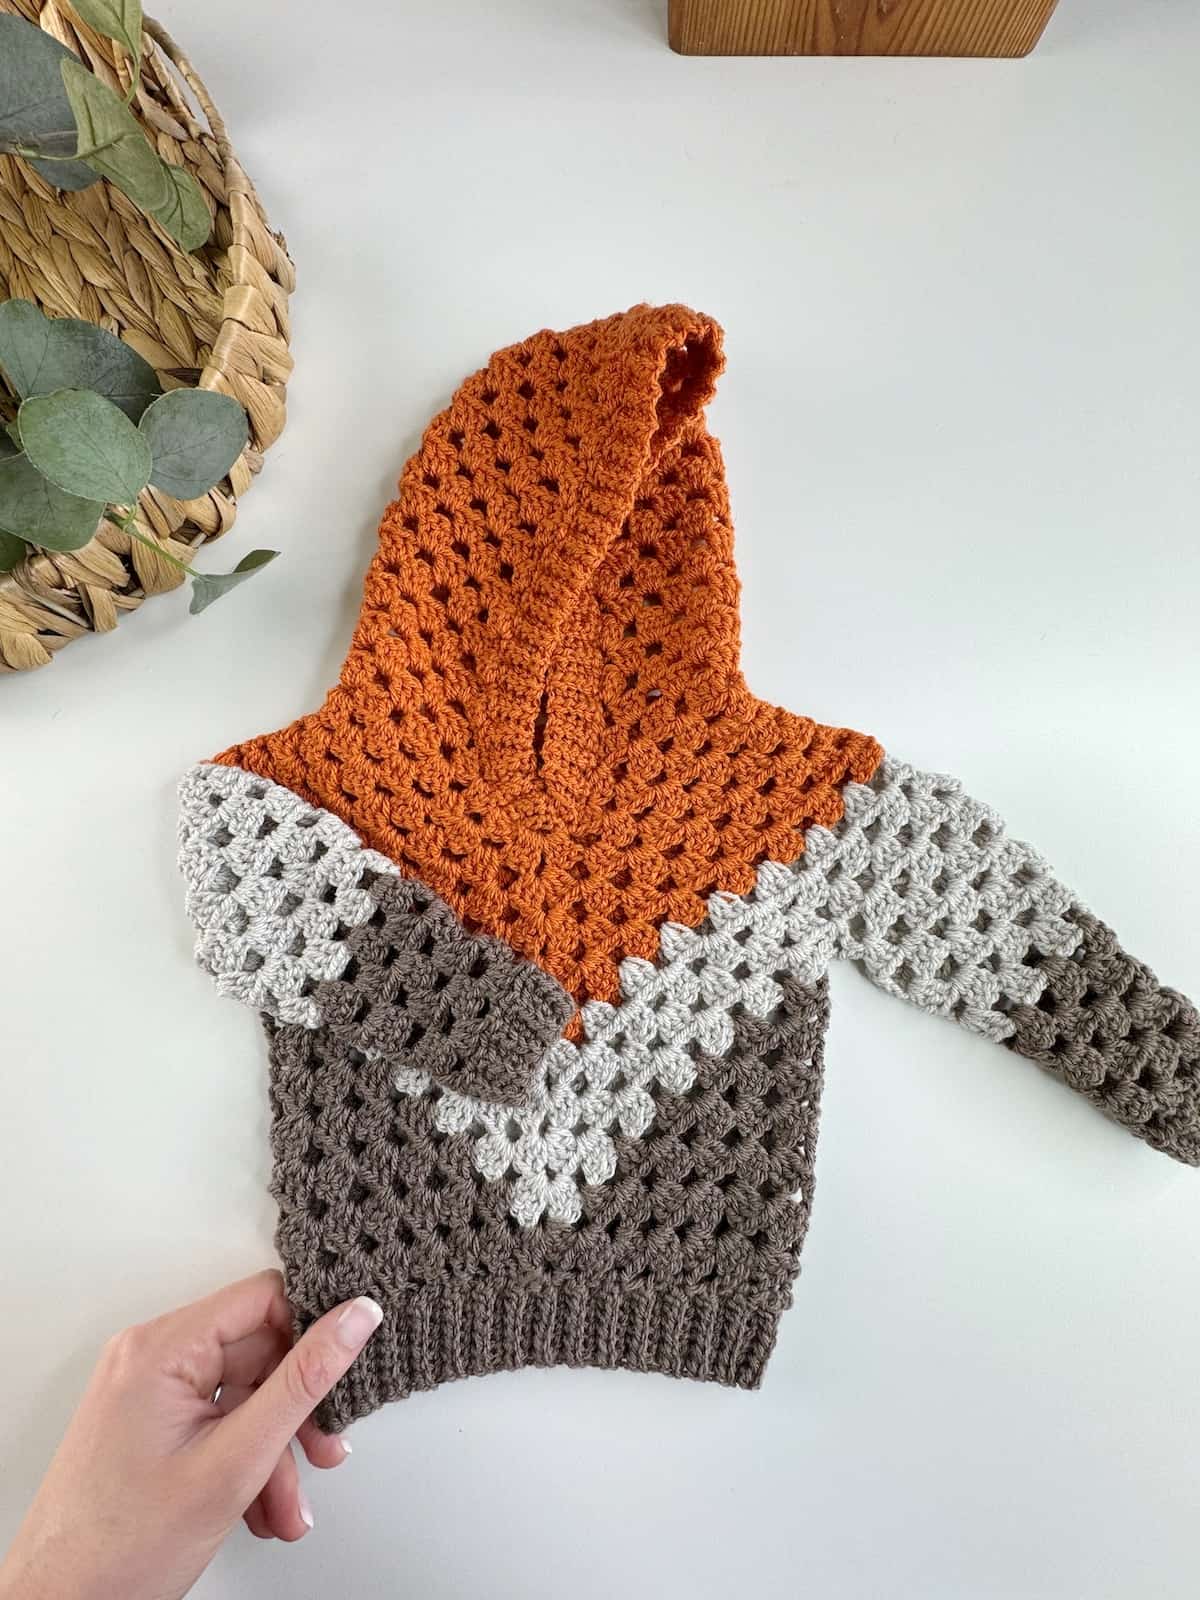 A hand holding a crocheted orange and grey hoodie.